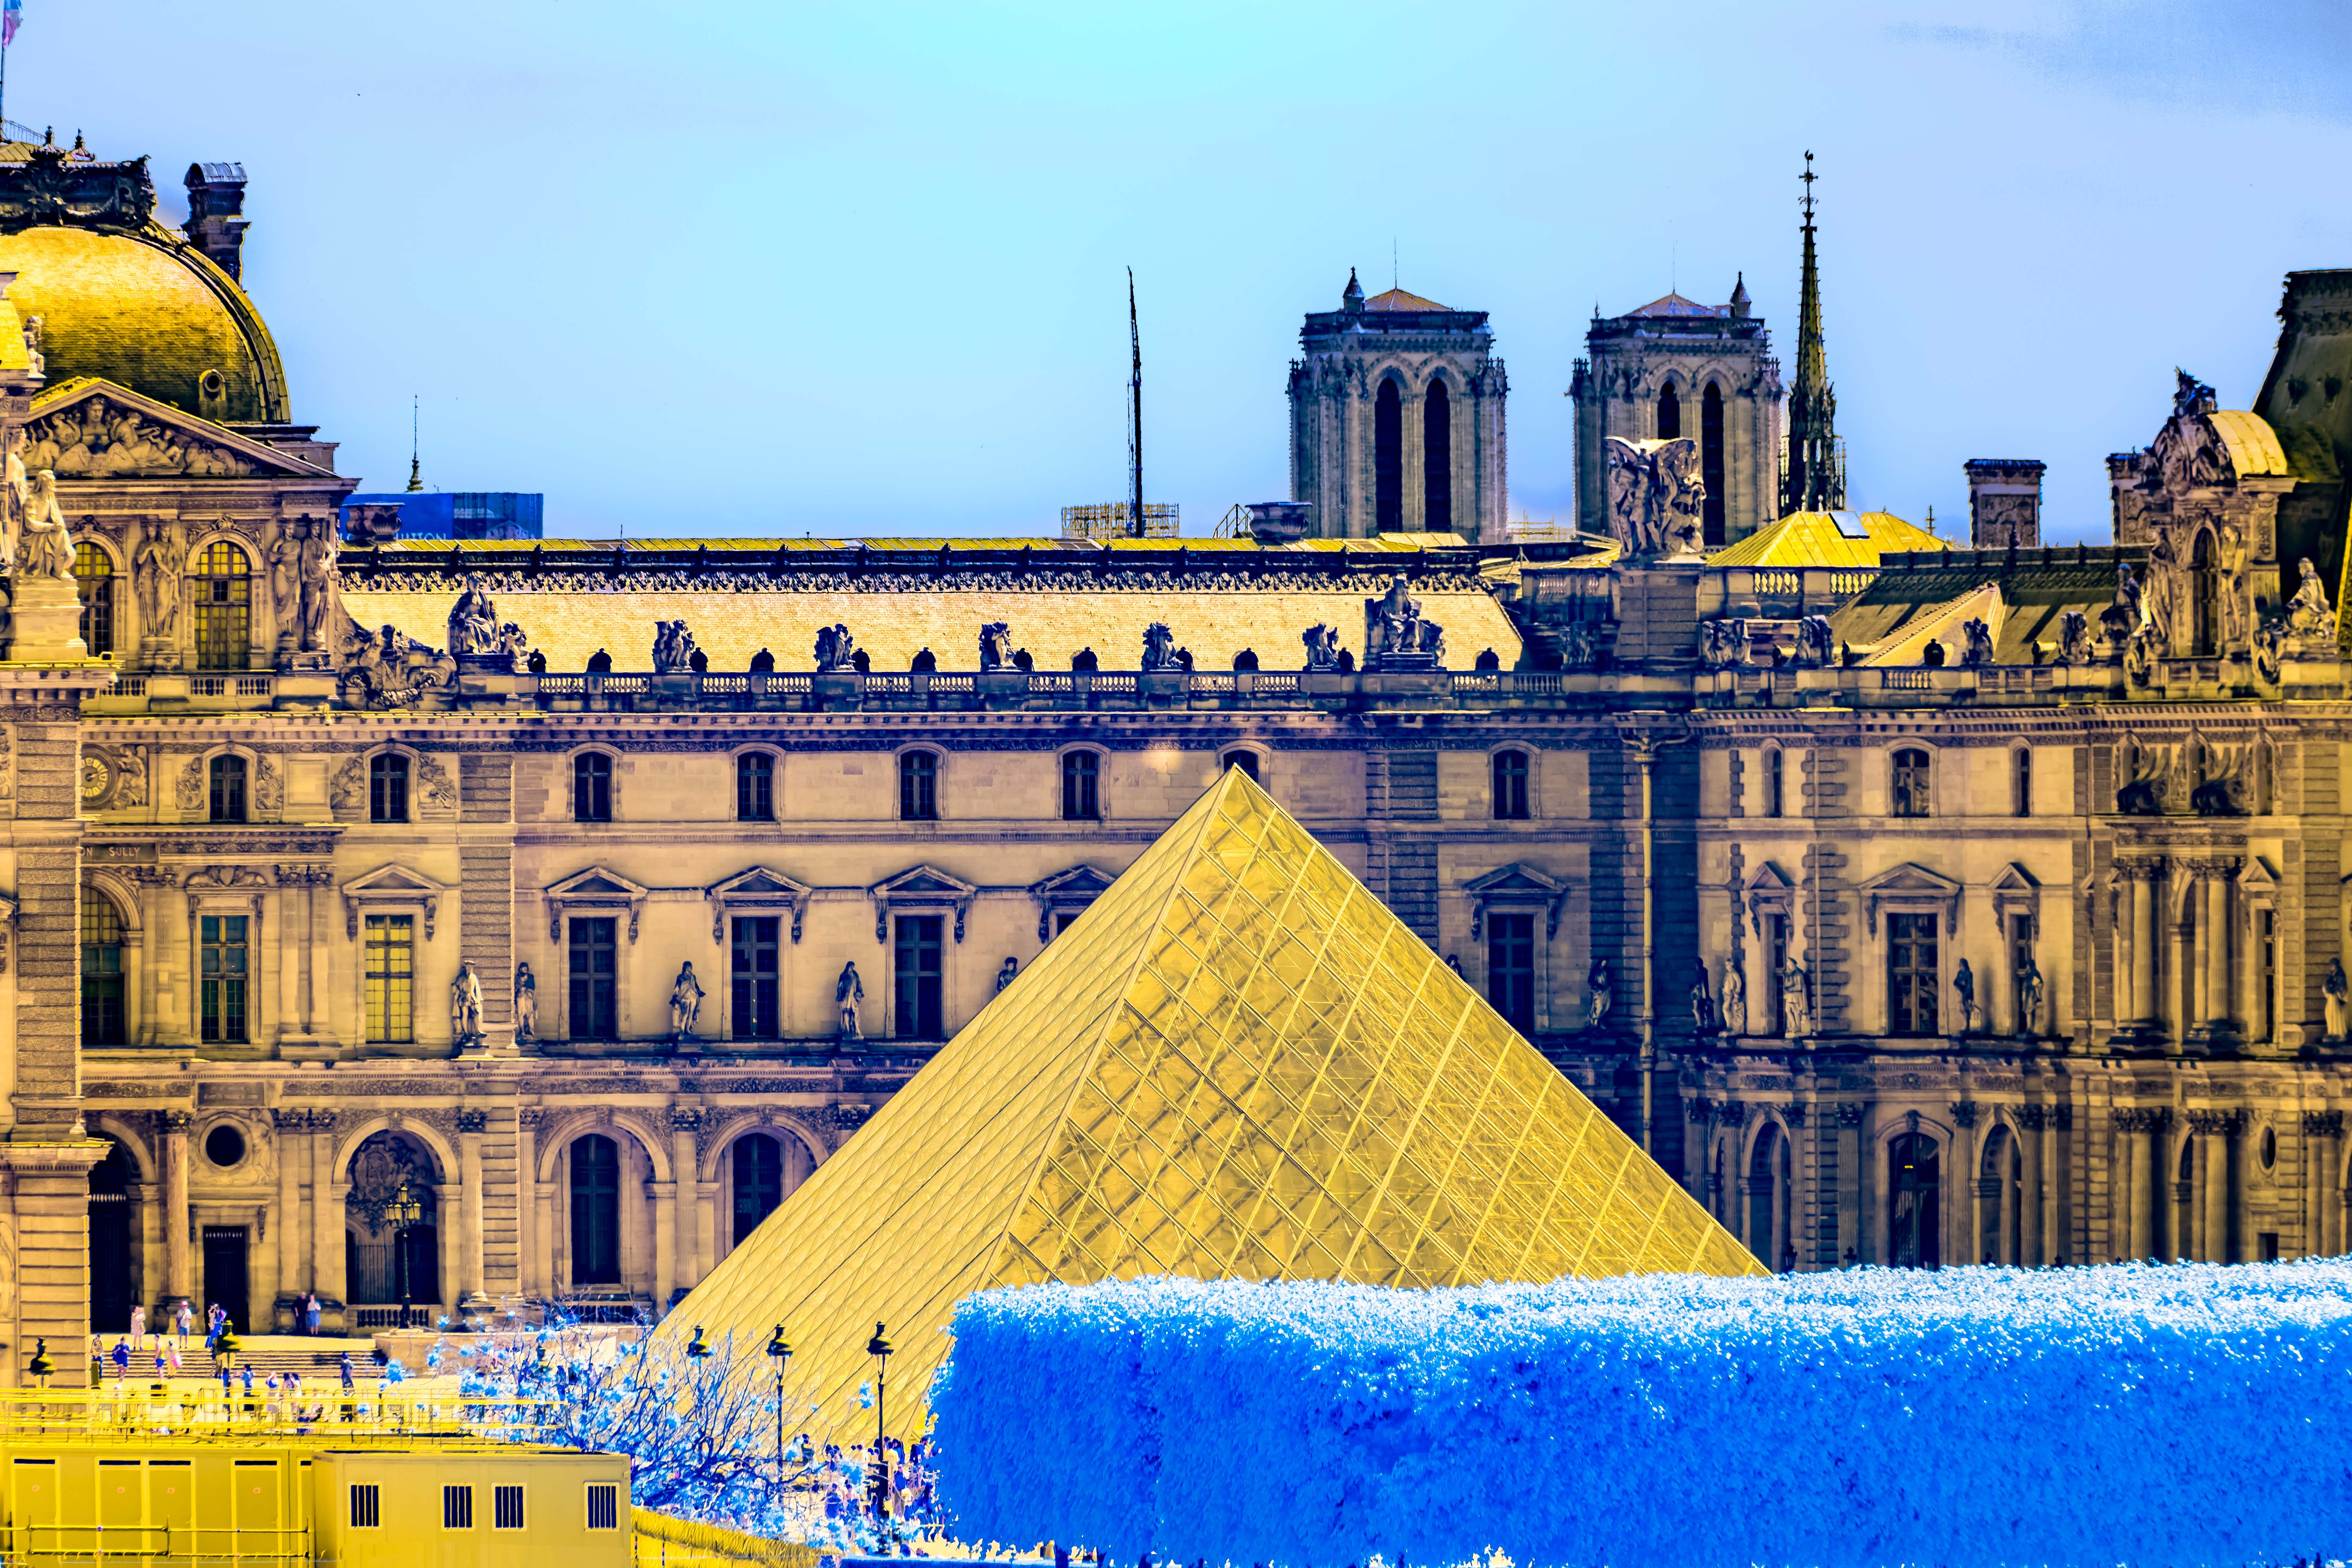 The Louvre Pyramid in front of the Louvre Museum 3 22aede69 71a2 45a0 a137 30c141bc9dbf